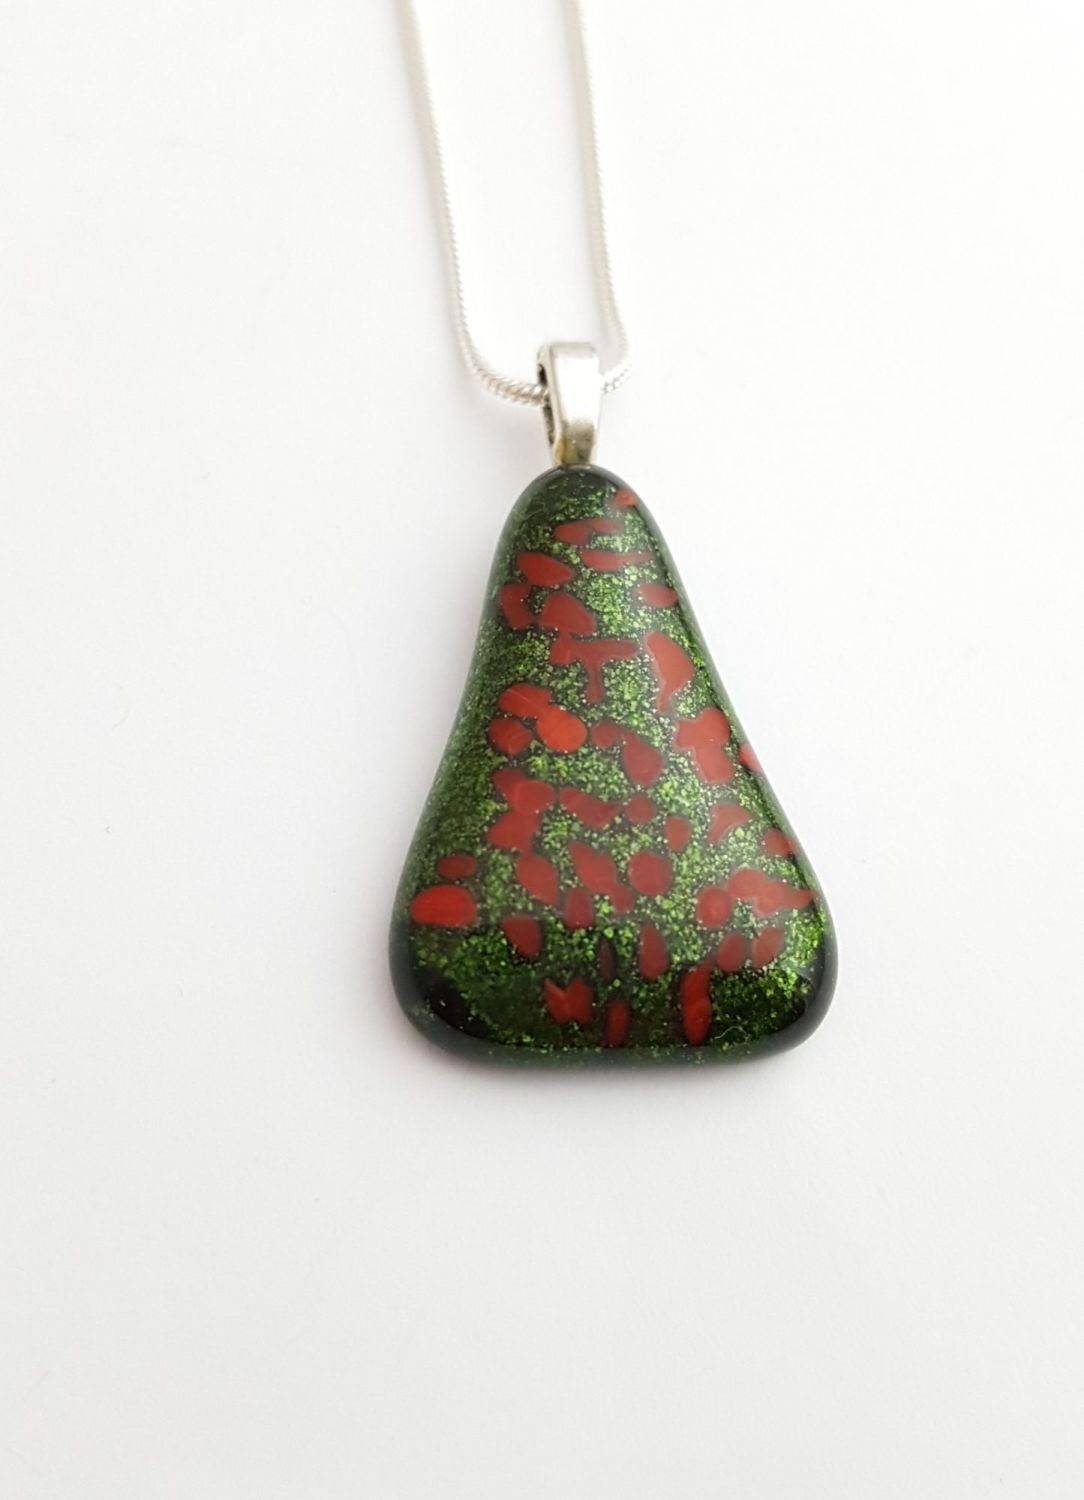 Sparkly Aventurine green pendant with red speckles